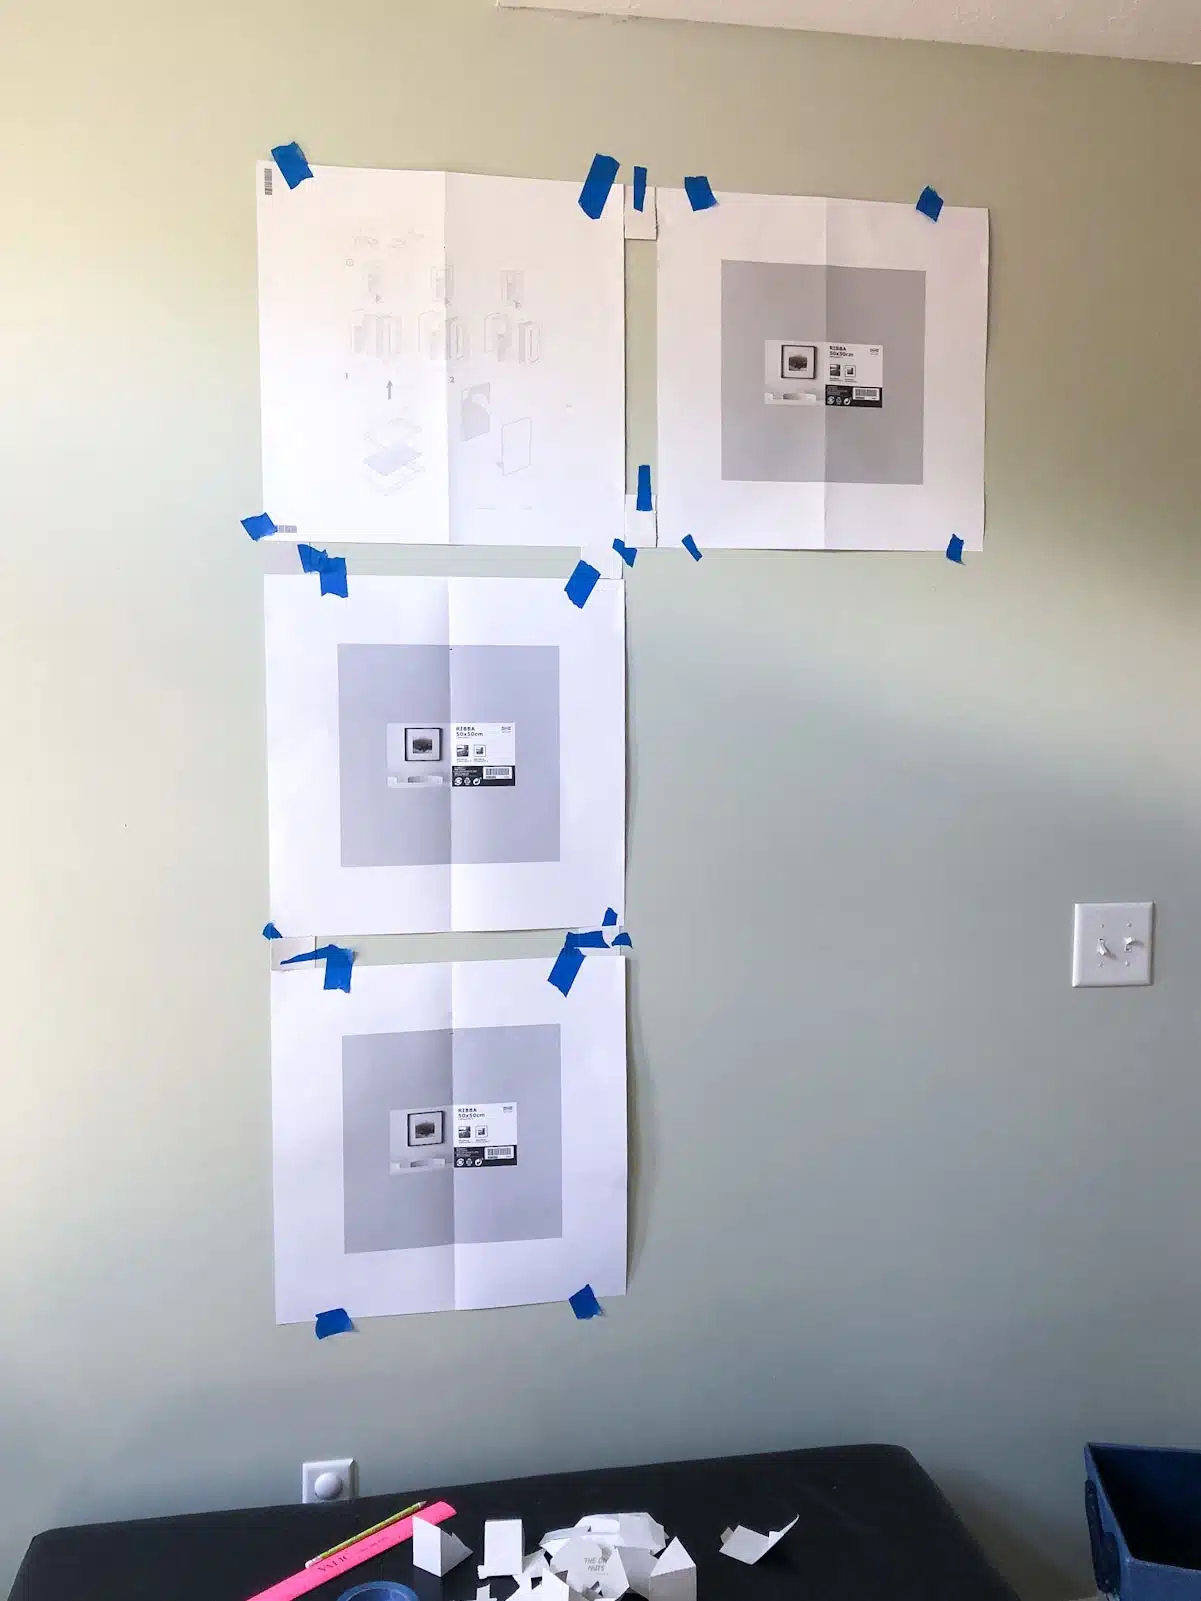 4 paper squares tape to wall.